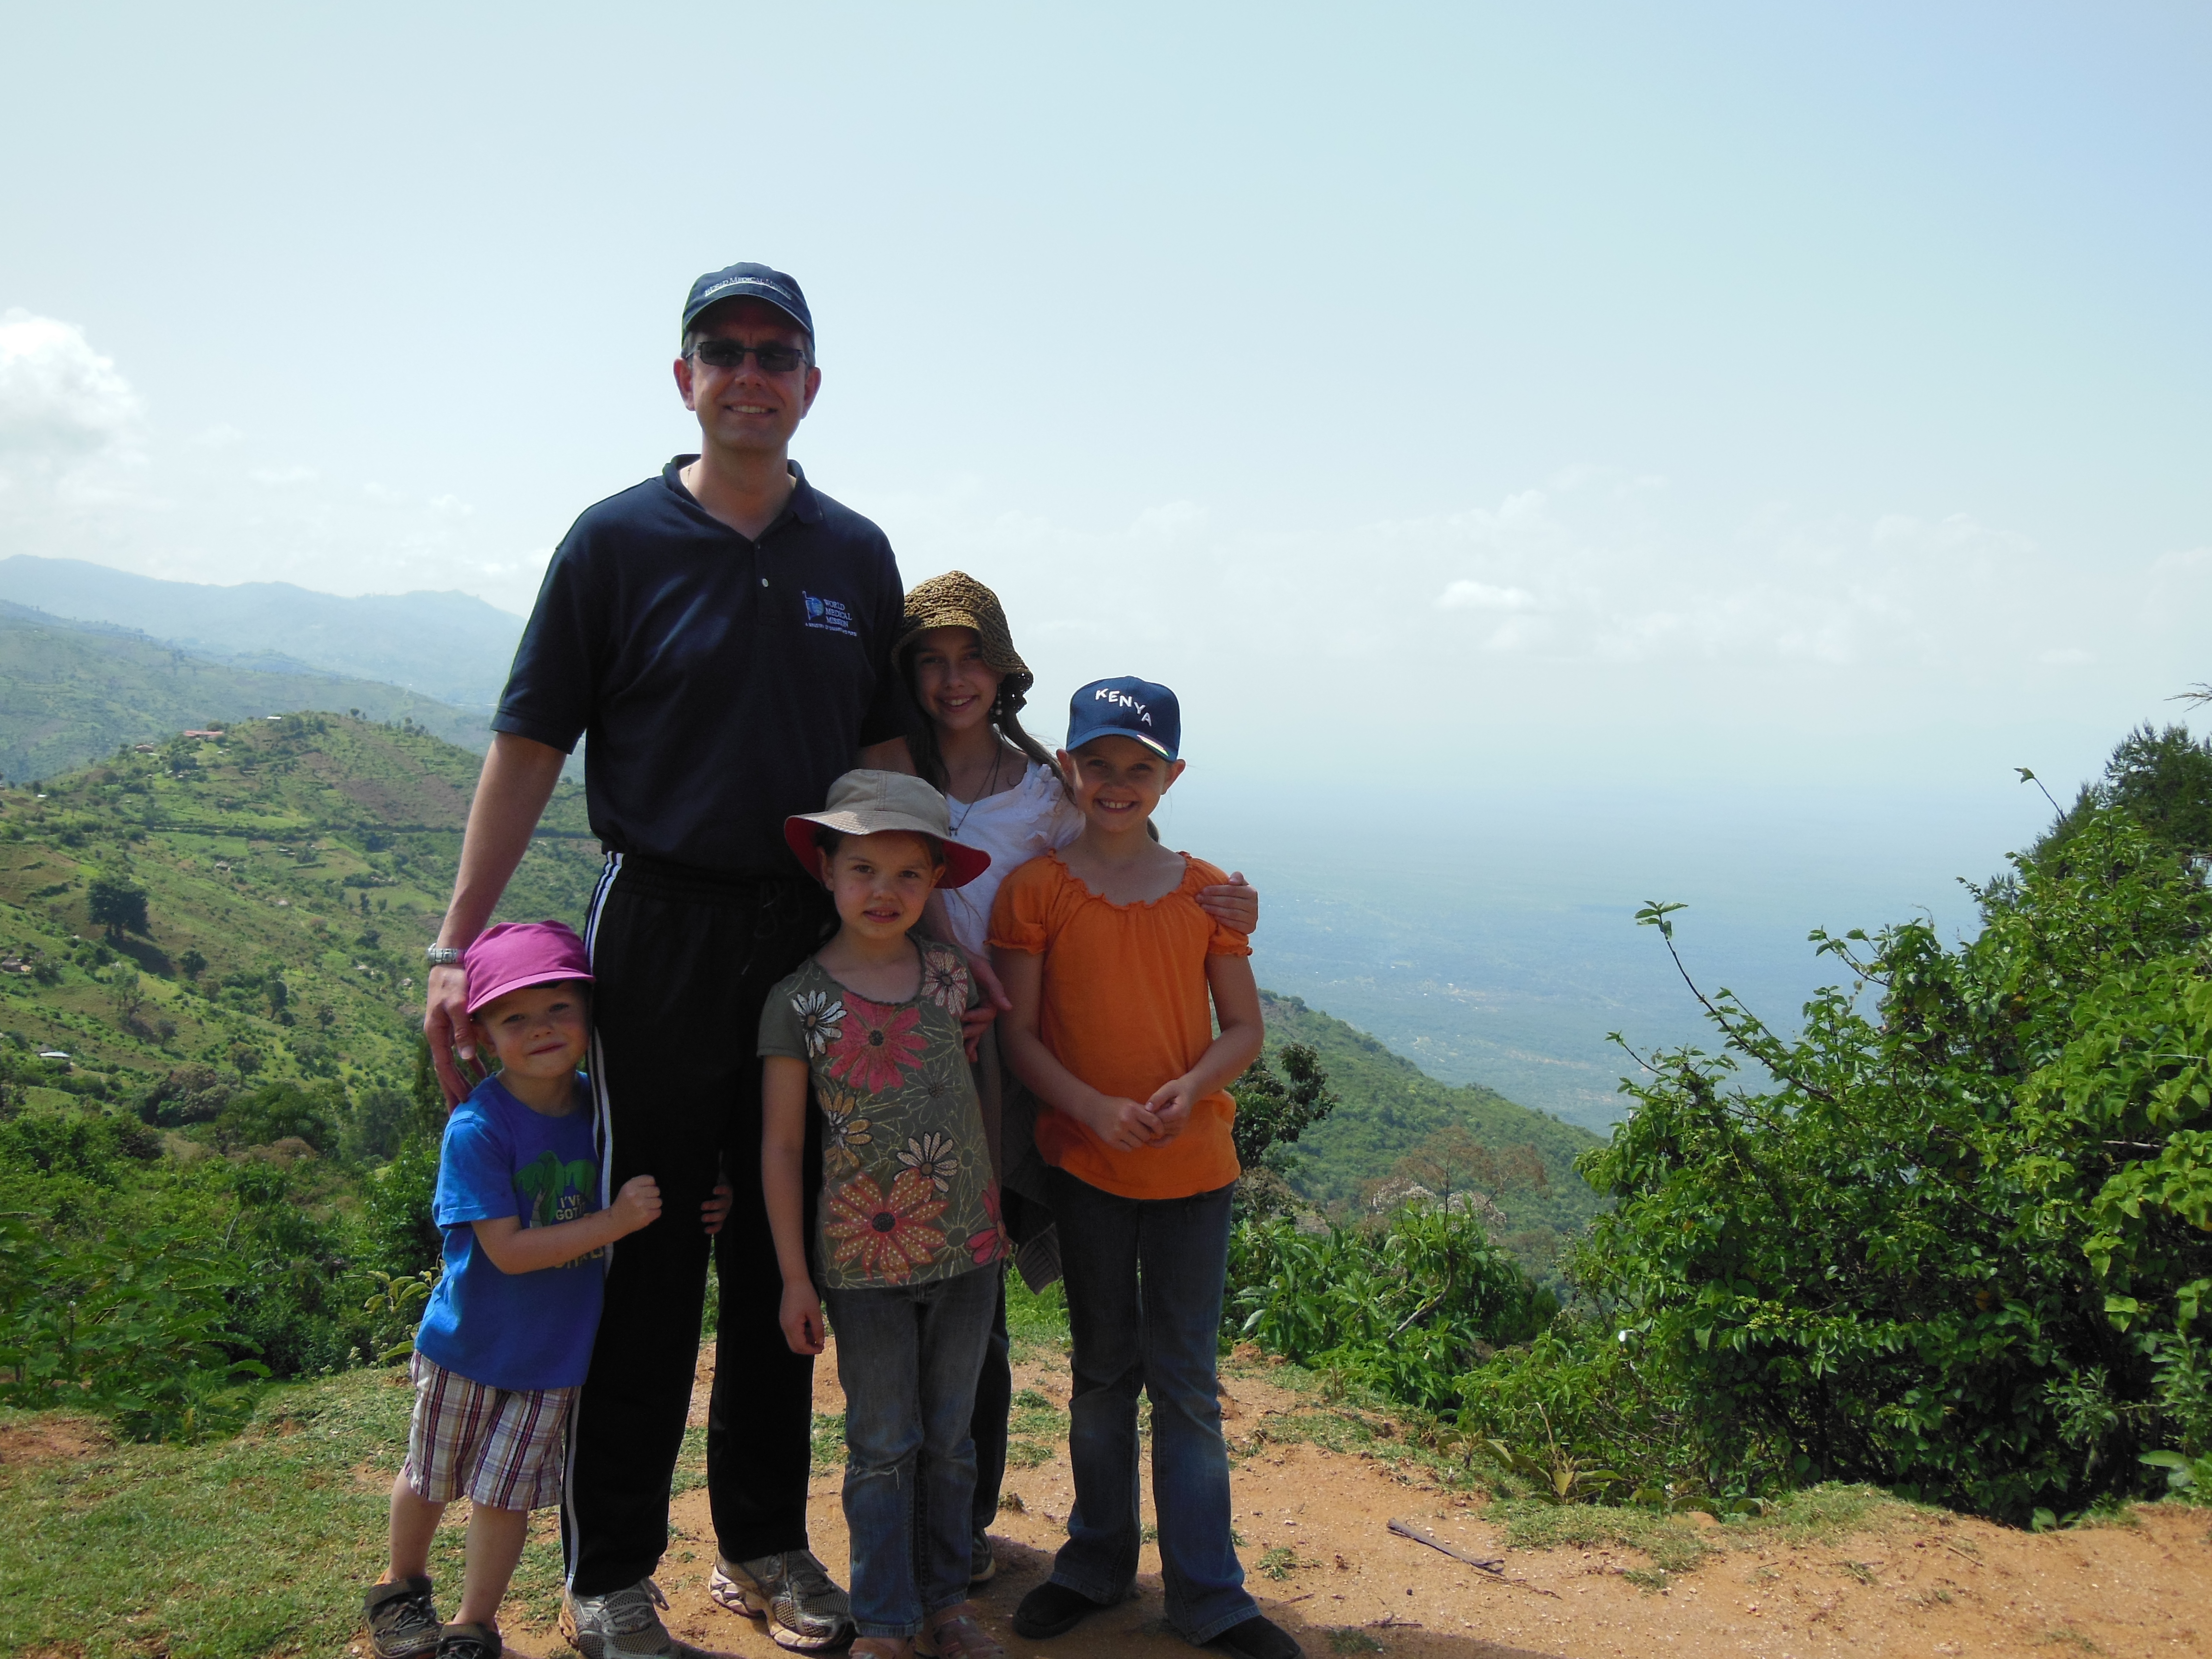 Jim and the kids at the edge of civilization in Kenya